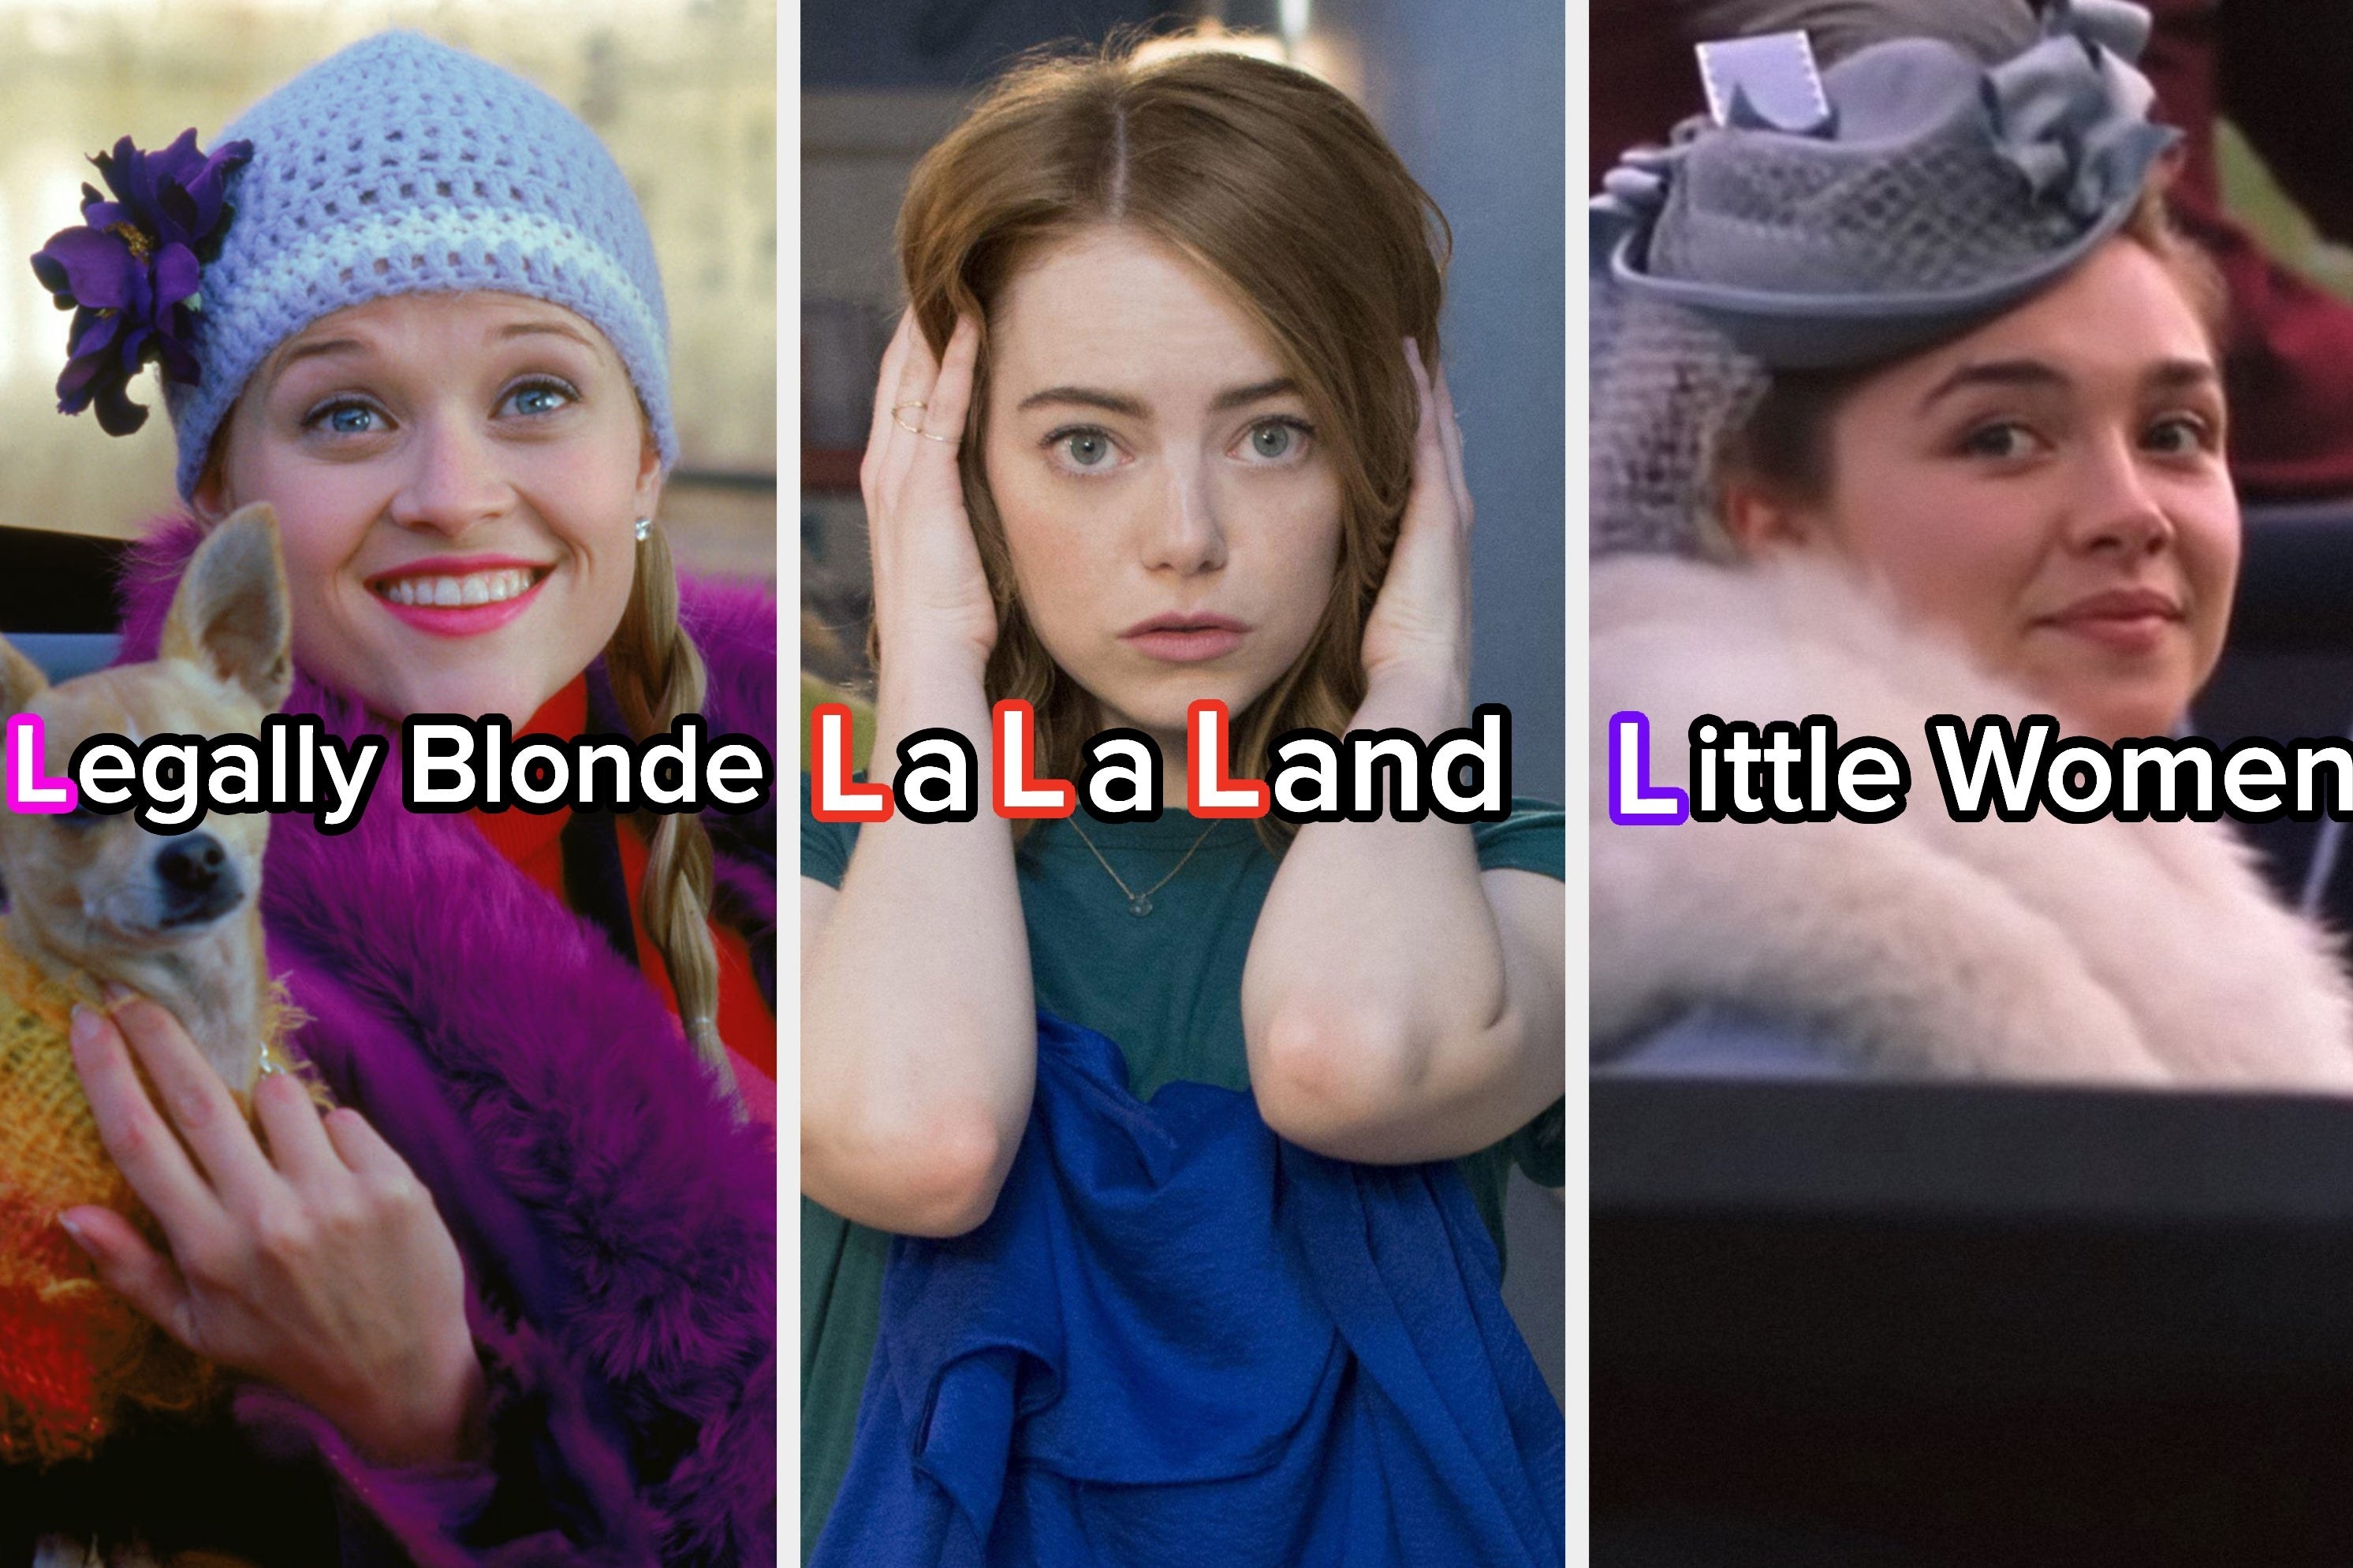 Three images: on the left, a scene from &quot;Legally Blonde,&quot; in the middle: a scene from &quot;La La Land,&quot; and on the far right: a scene from &quot;Little Women&quot; (2019). All images have their titles overlayed on top with the beginning &quot;L&quot;s highlighted